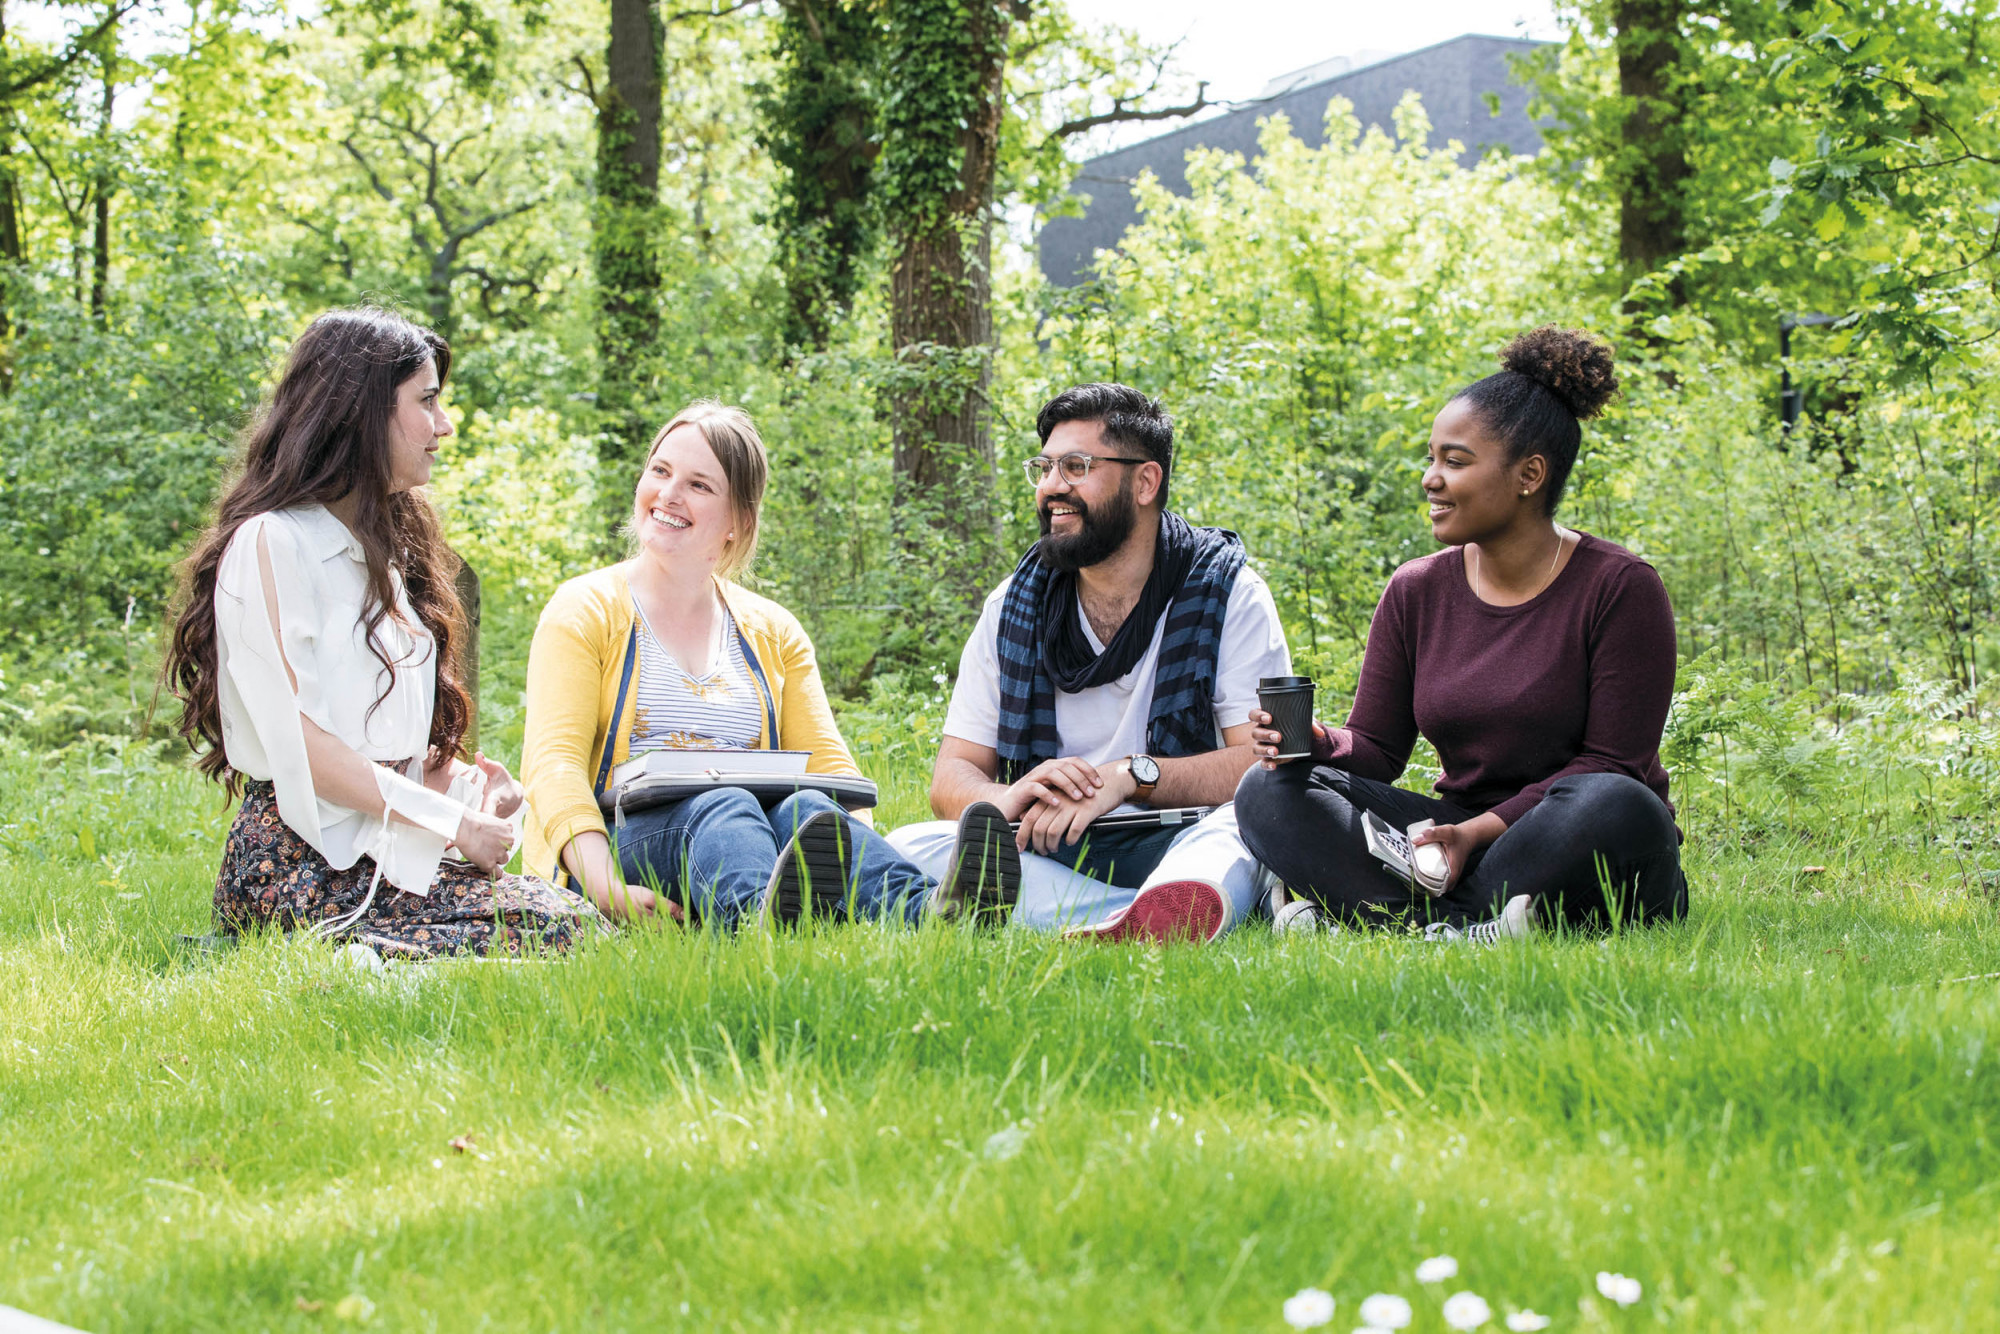 University of Kent students talking while sat in outside on grass